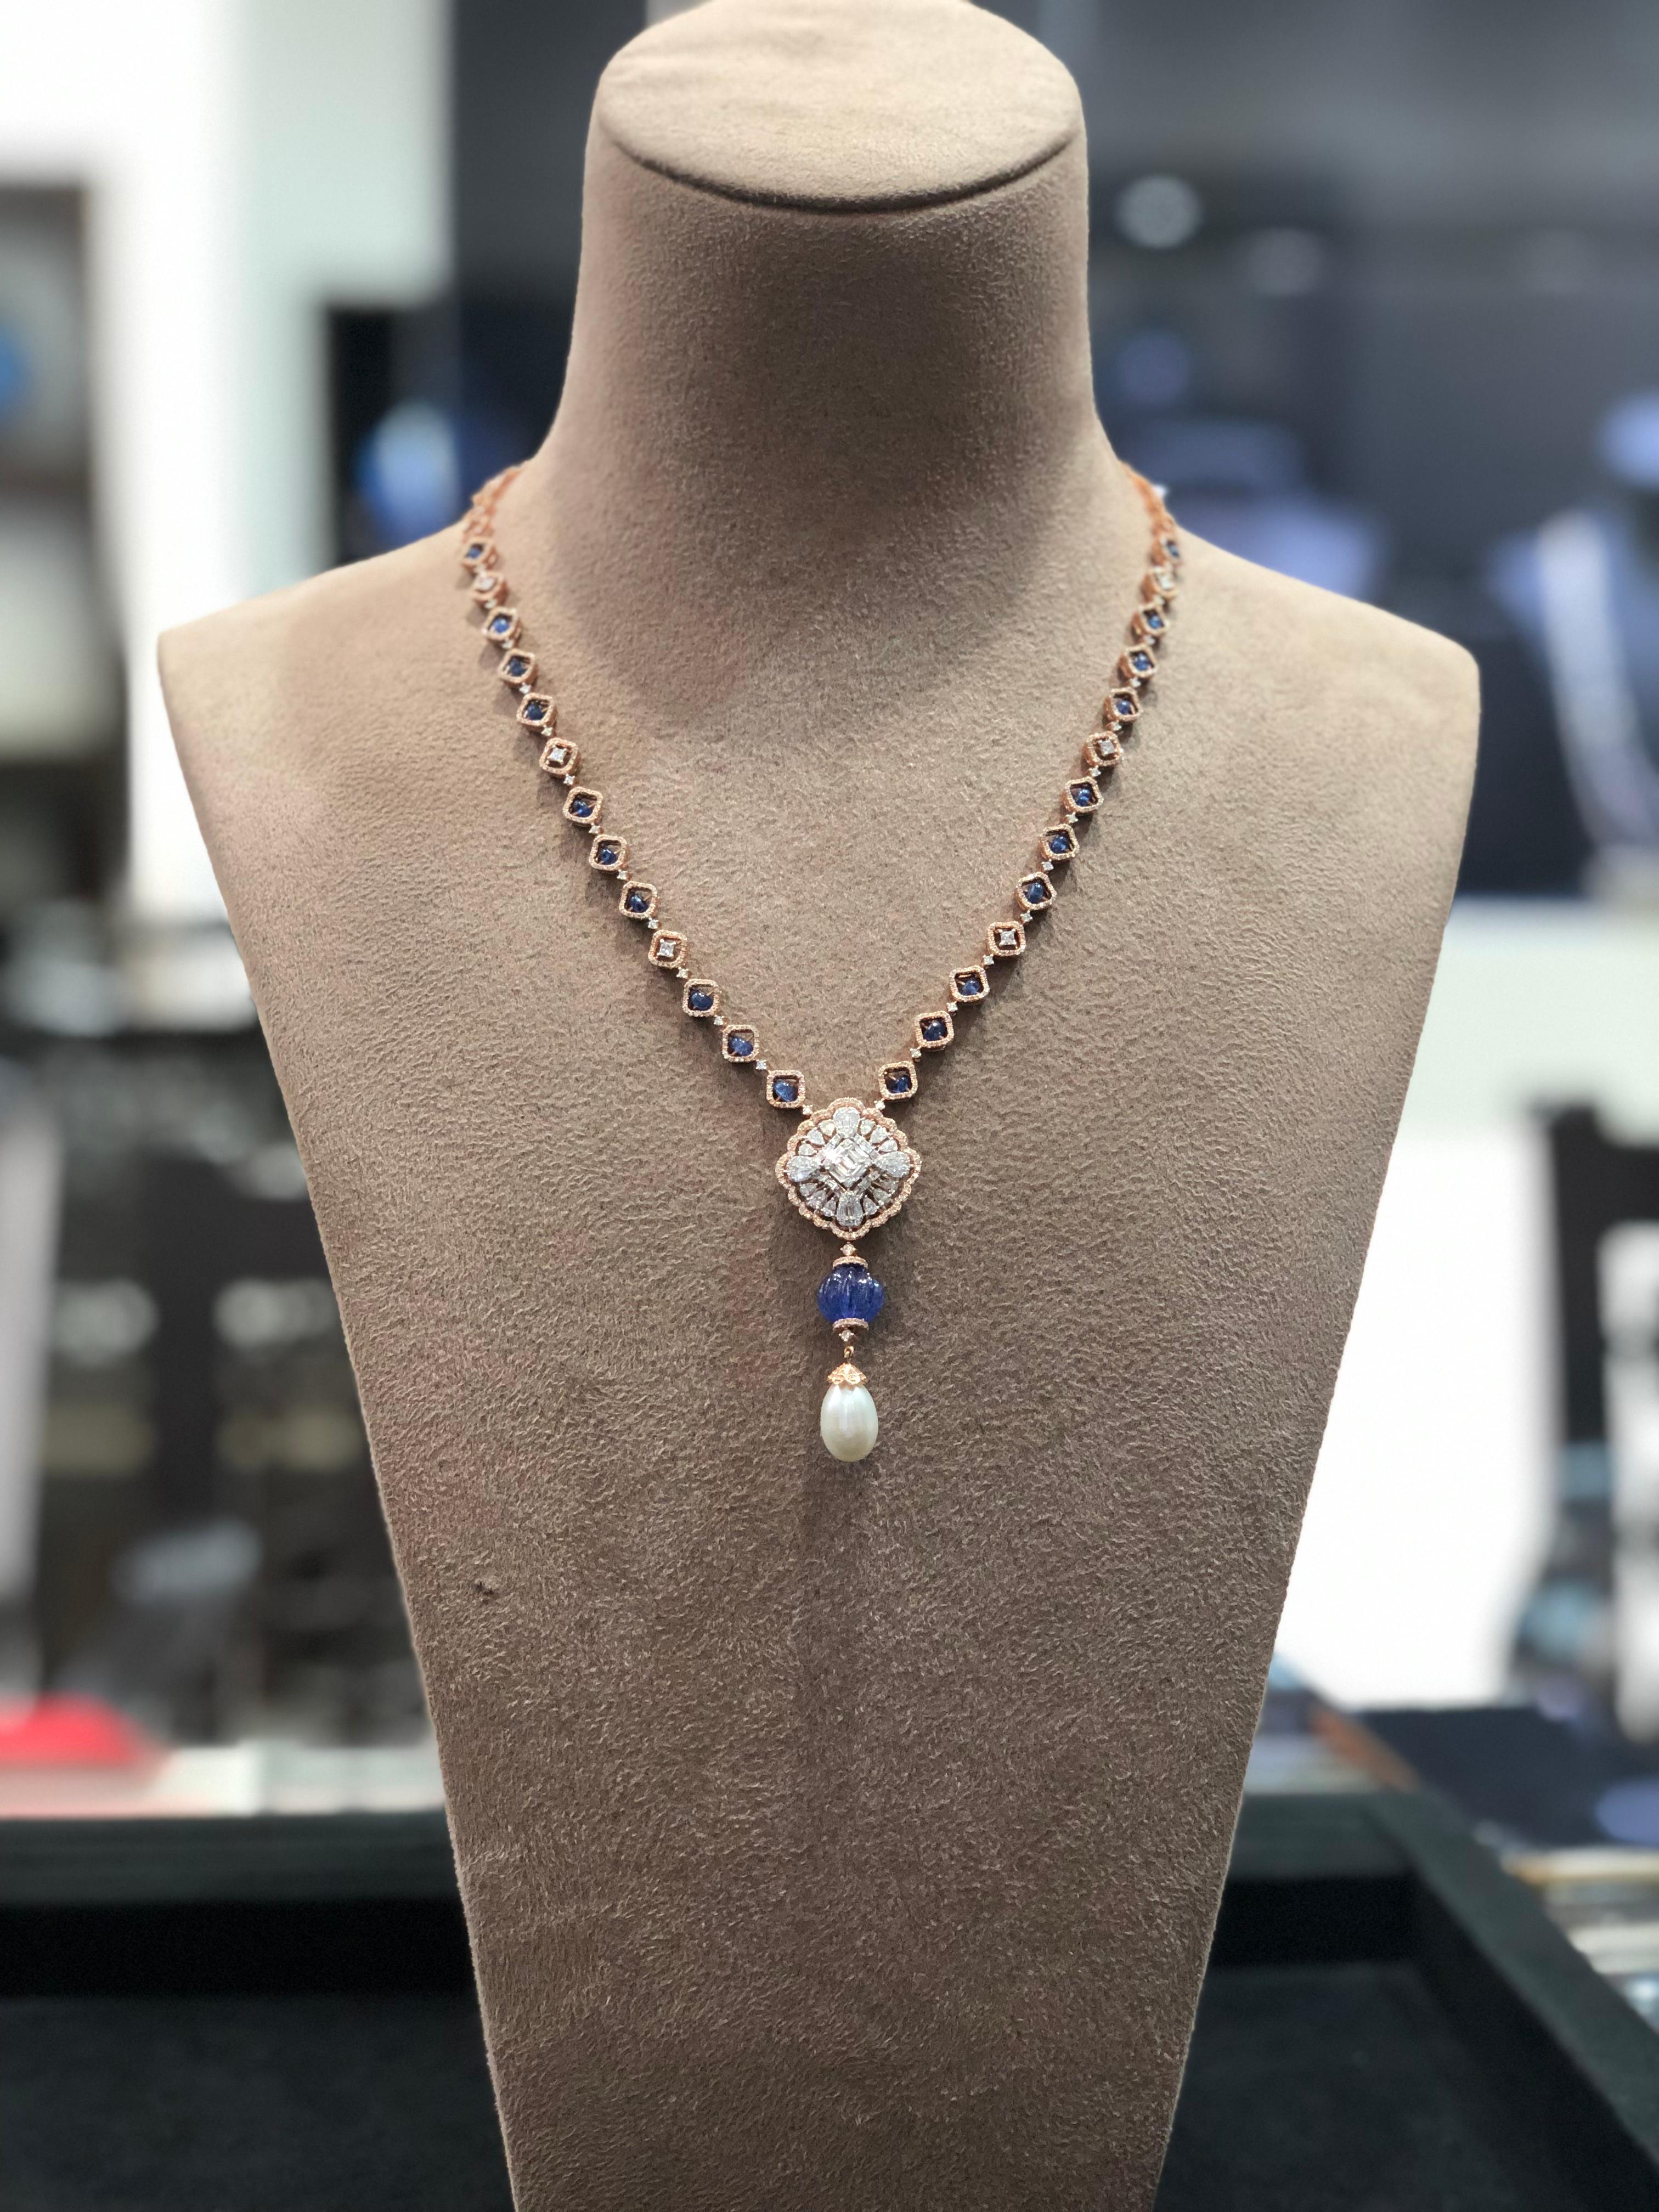 18k rose gold, sapphire, tanzanite, pearl and diamond chain necklace.
An impressive diamond and gem stone chain necklace for those who like to push that modern edge of minimalist and geometric inspired jewellery into their wardrobe.

Diamonds:  3.41